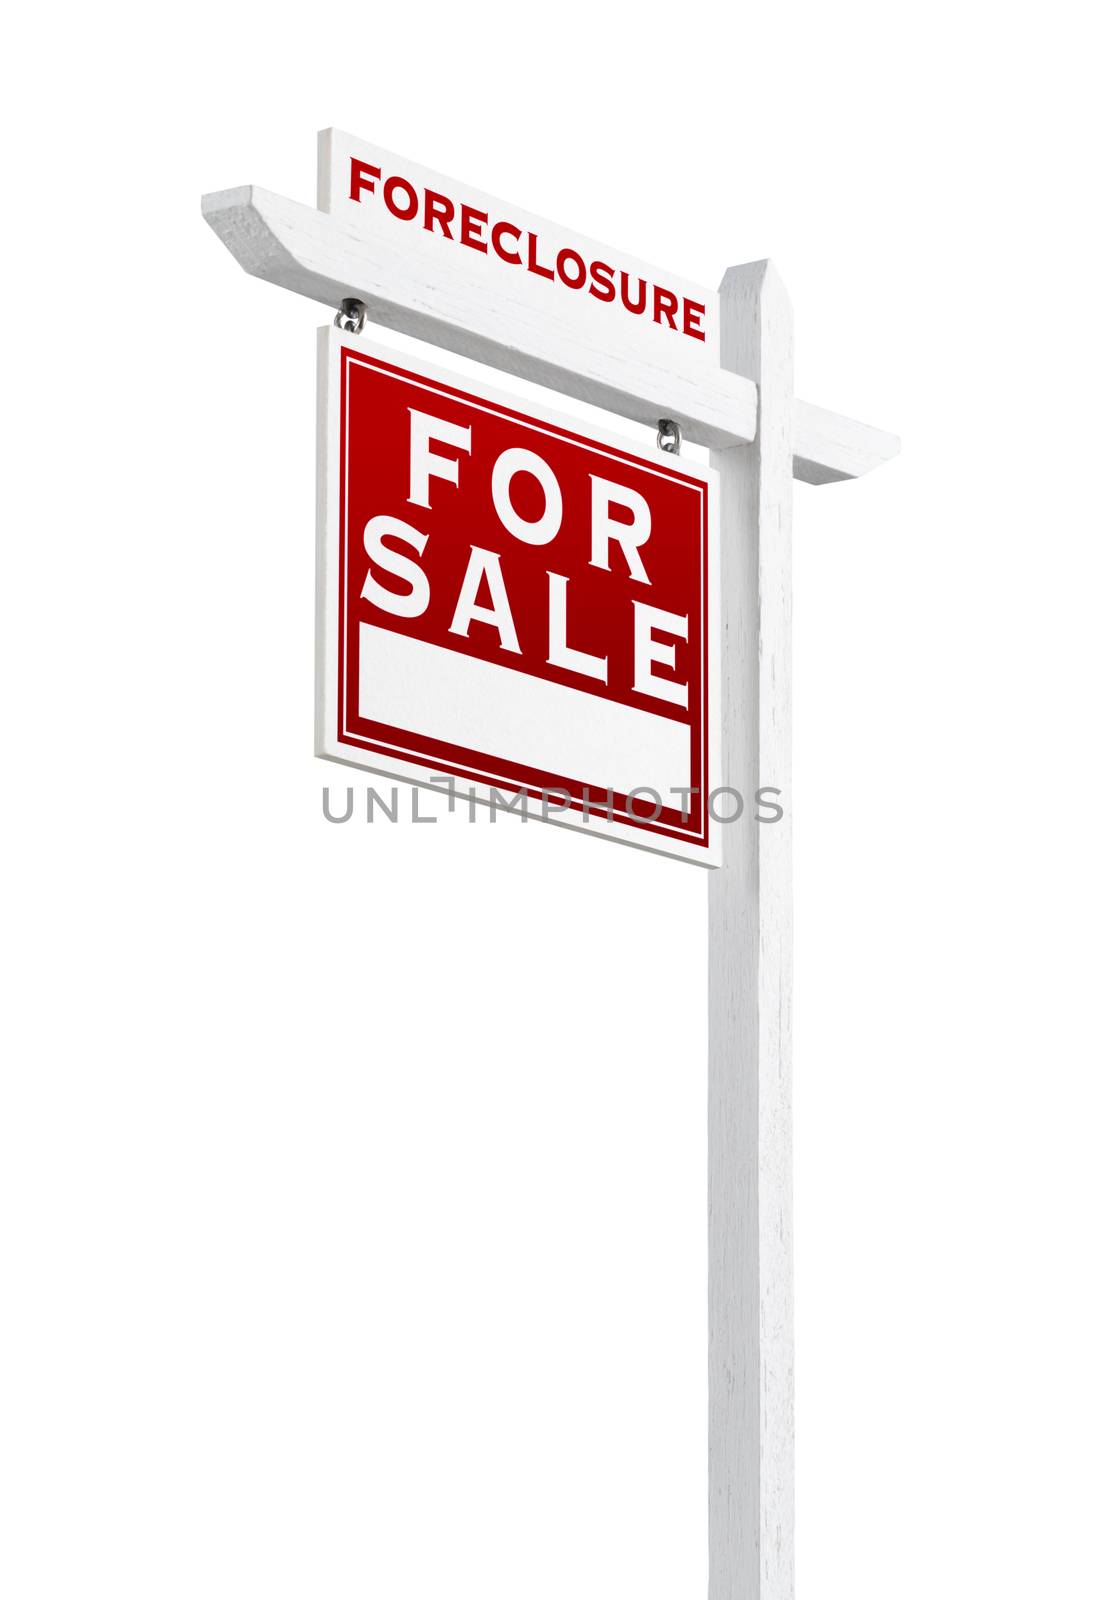 Left Facing Foreclosure Sold For Sale Real Estate Sign Isolated on White.